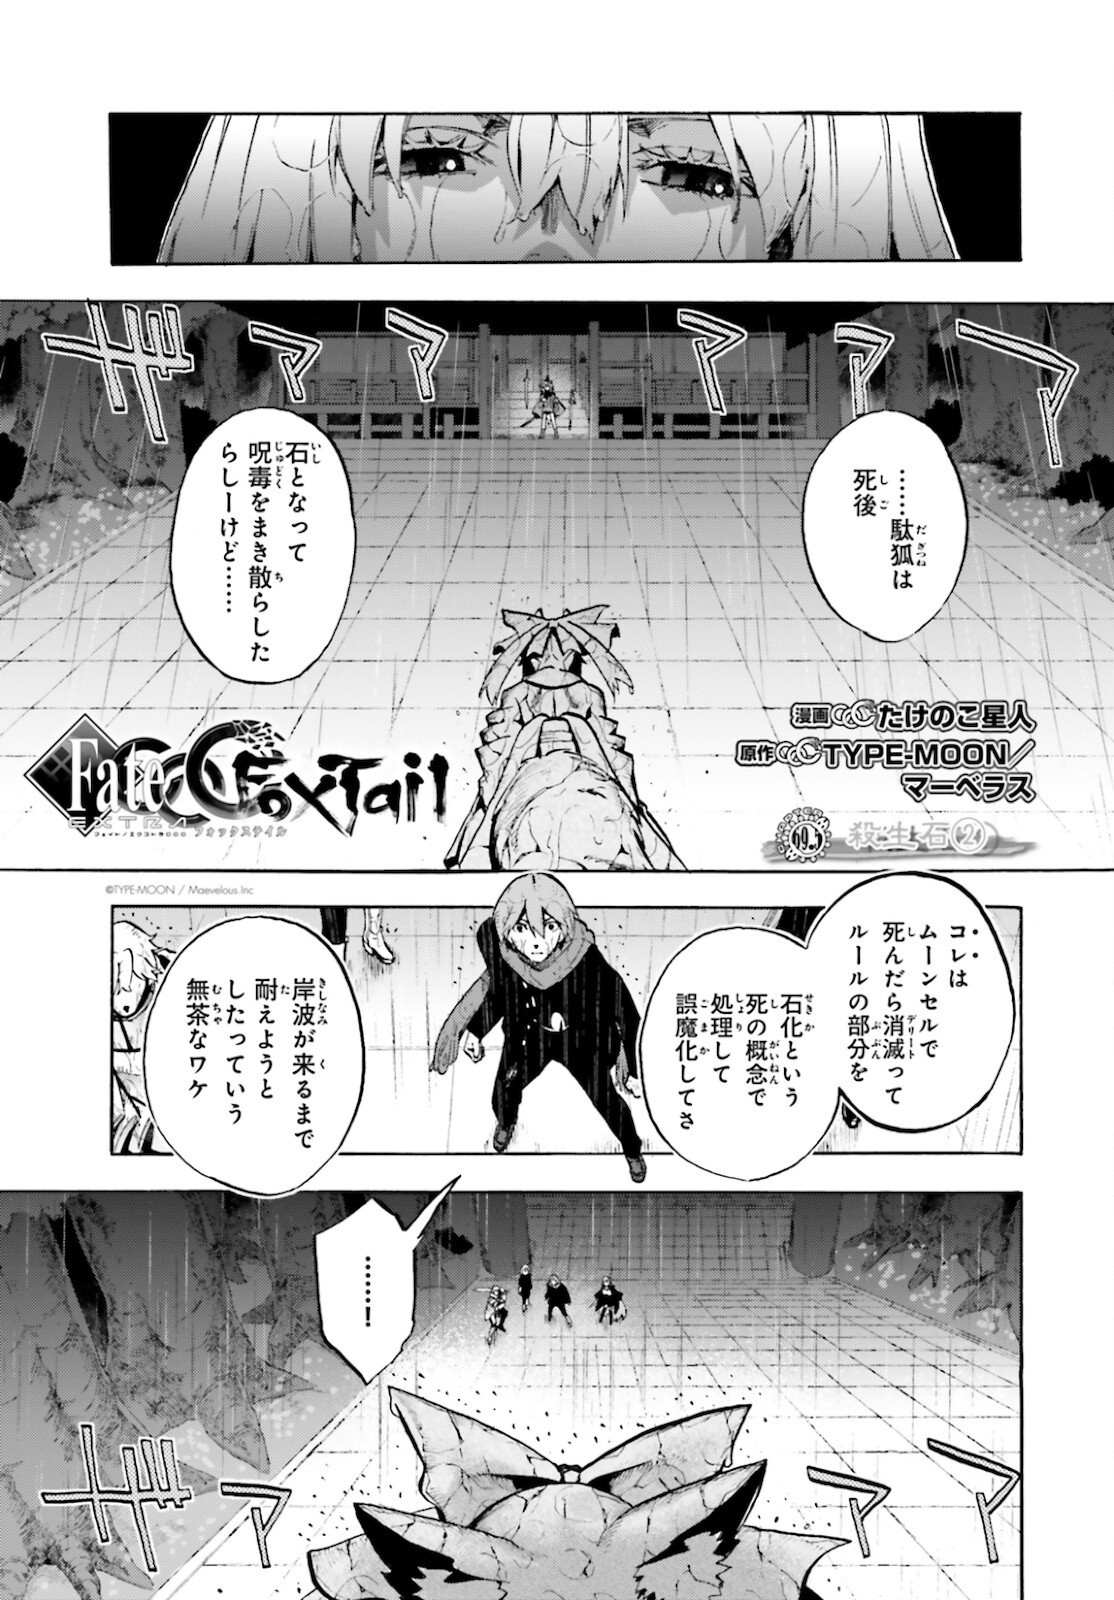 Fate/Extra CCC Fox Tail - Chapter 69.5 - Page 1